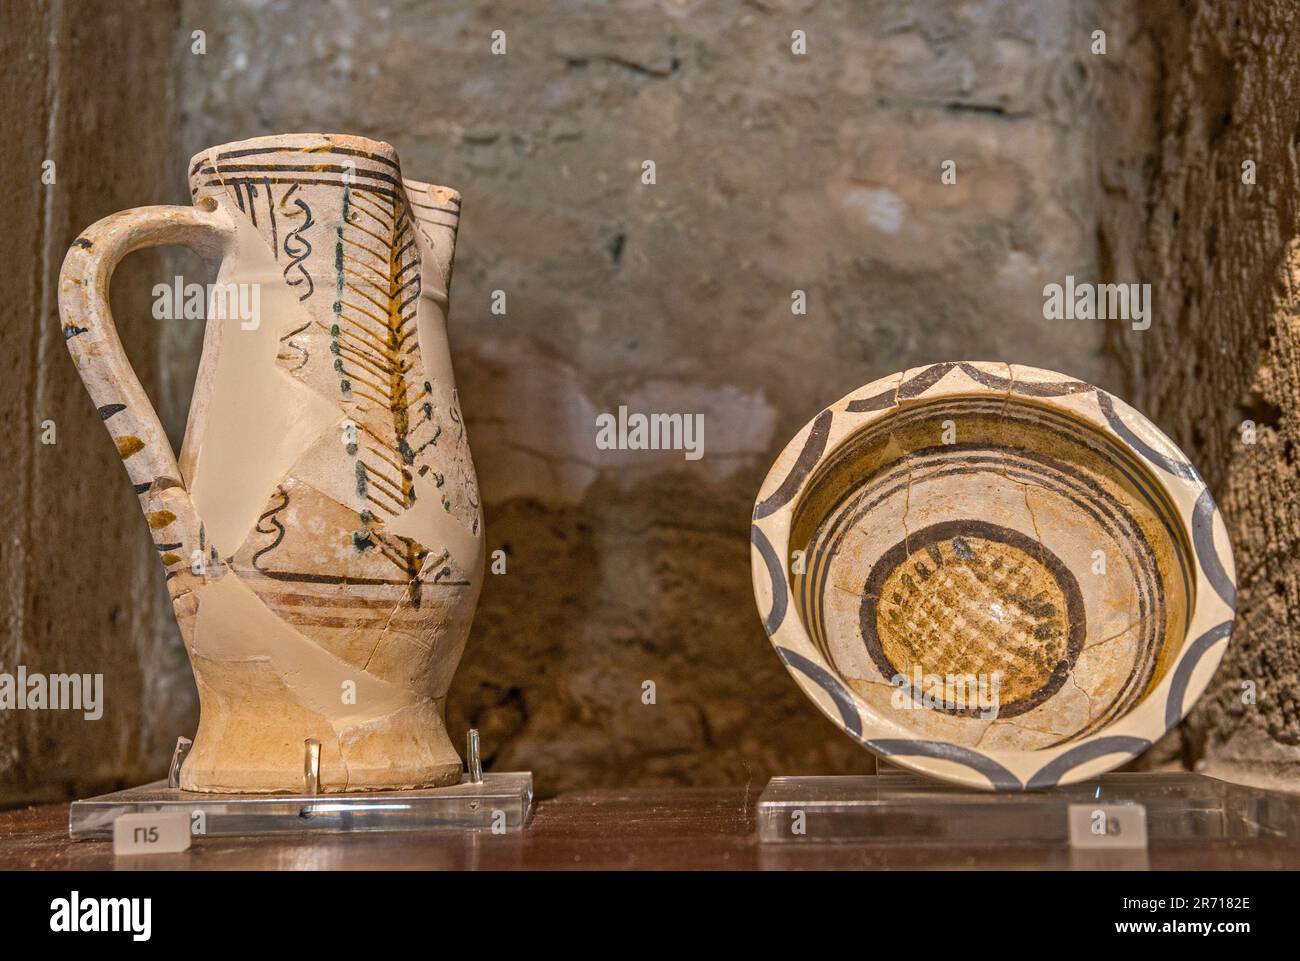 Ancient pottery, displayed at gallery in the keep, Frankish Castle of Chlemoutsi, near village of Kastro, Peloponnese peninsula, West Greece region, Greece Stock Photo